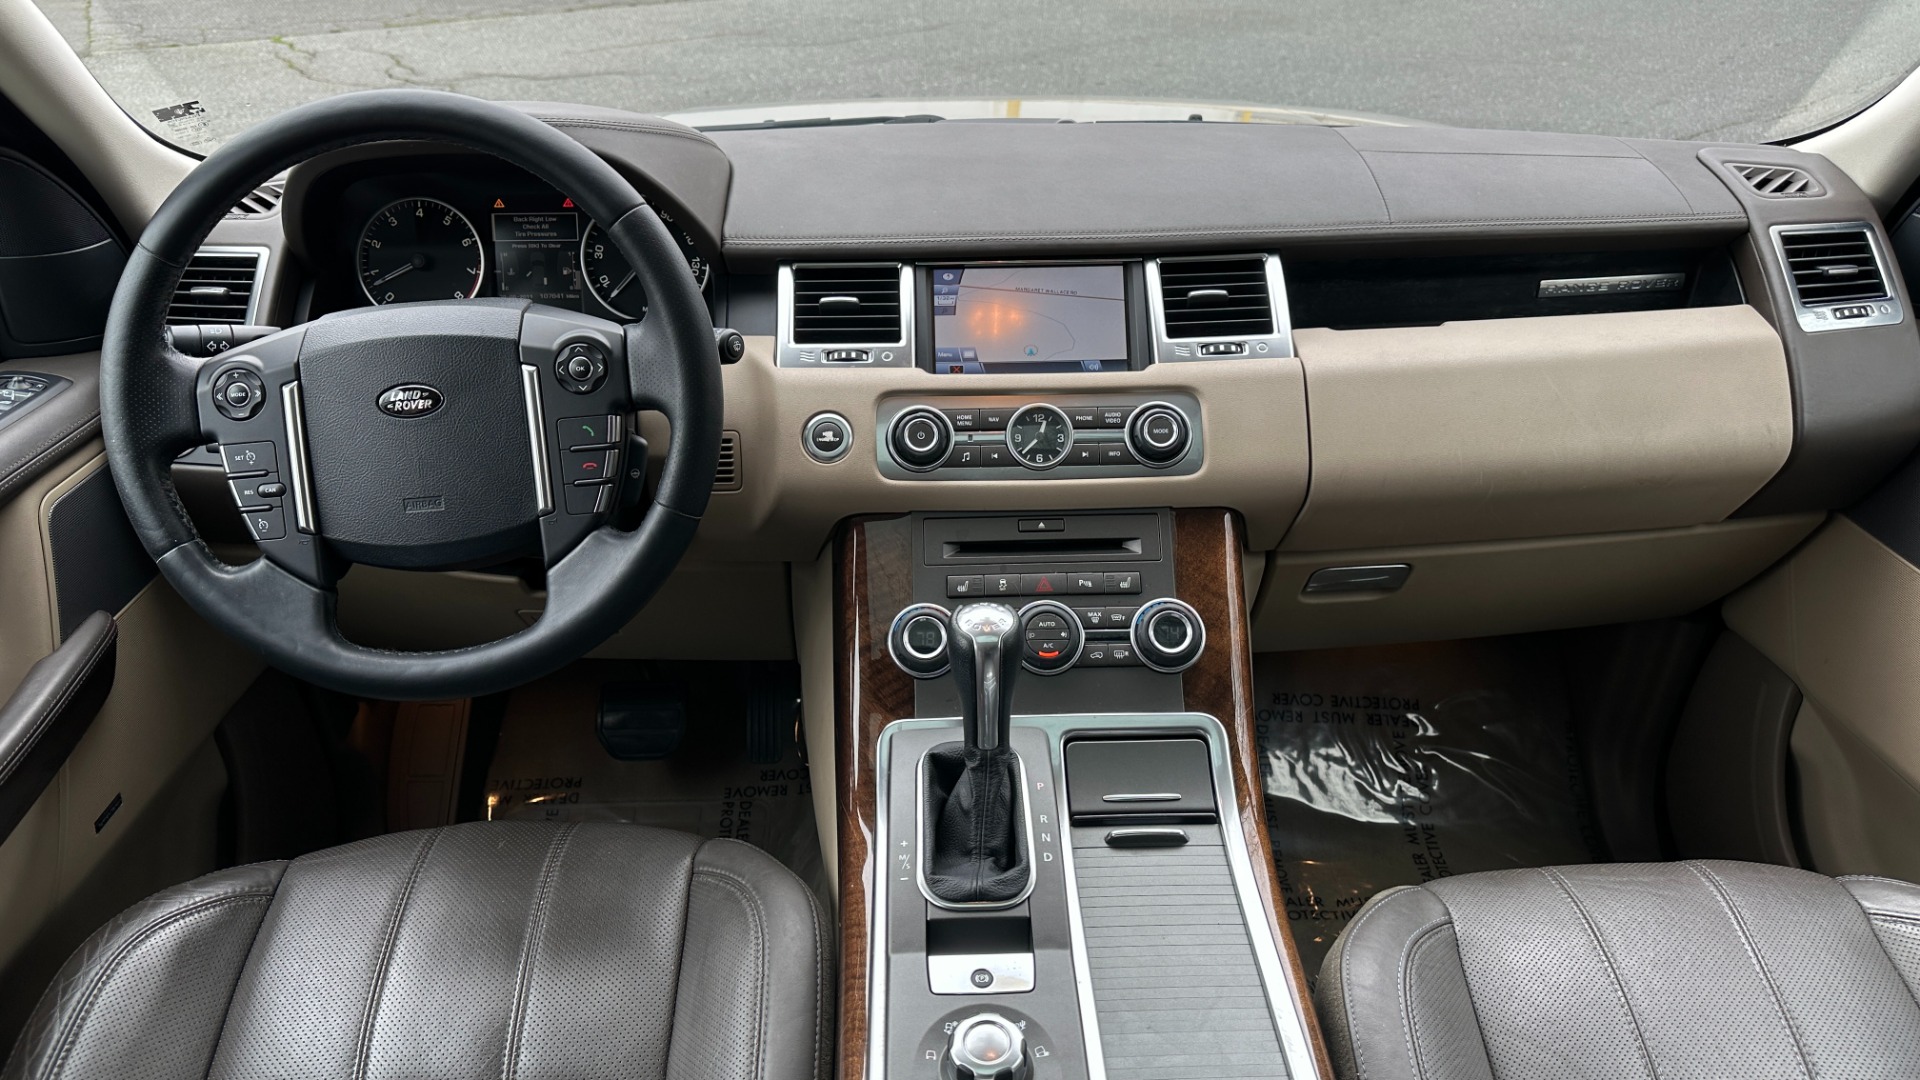 Used 2011 Land Rover Range Rover Sport HSE LUX / LEATHER / WOOD TRIM / LUXURY INTERIOR PKG / DIGITAL AND SAT RADIO for sale Sold at Formula Imports in Charlotte NC 28227 25